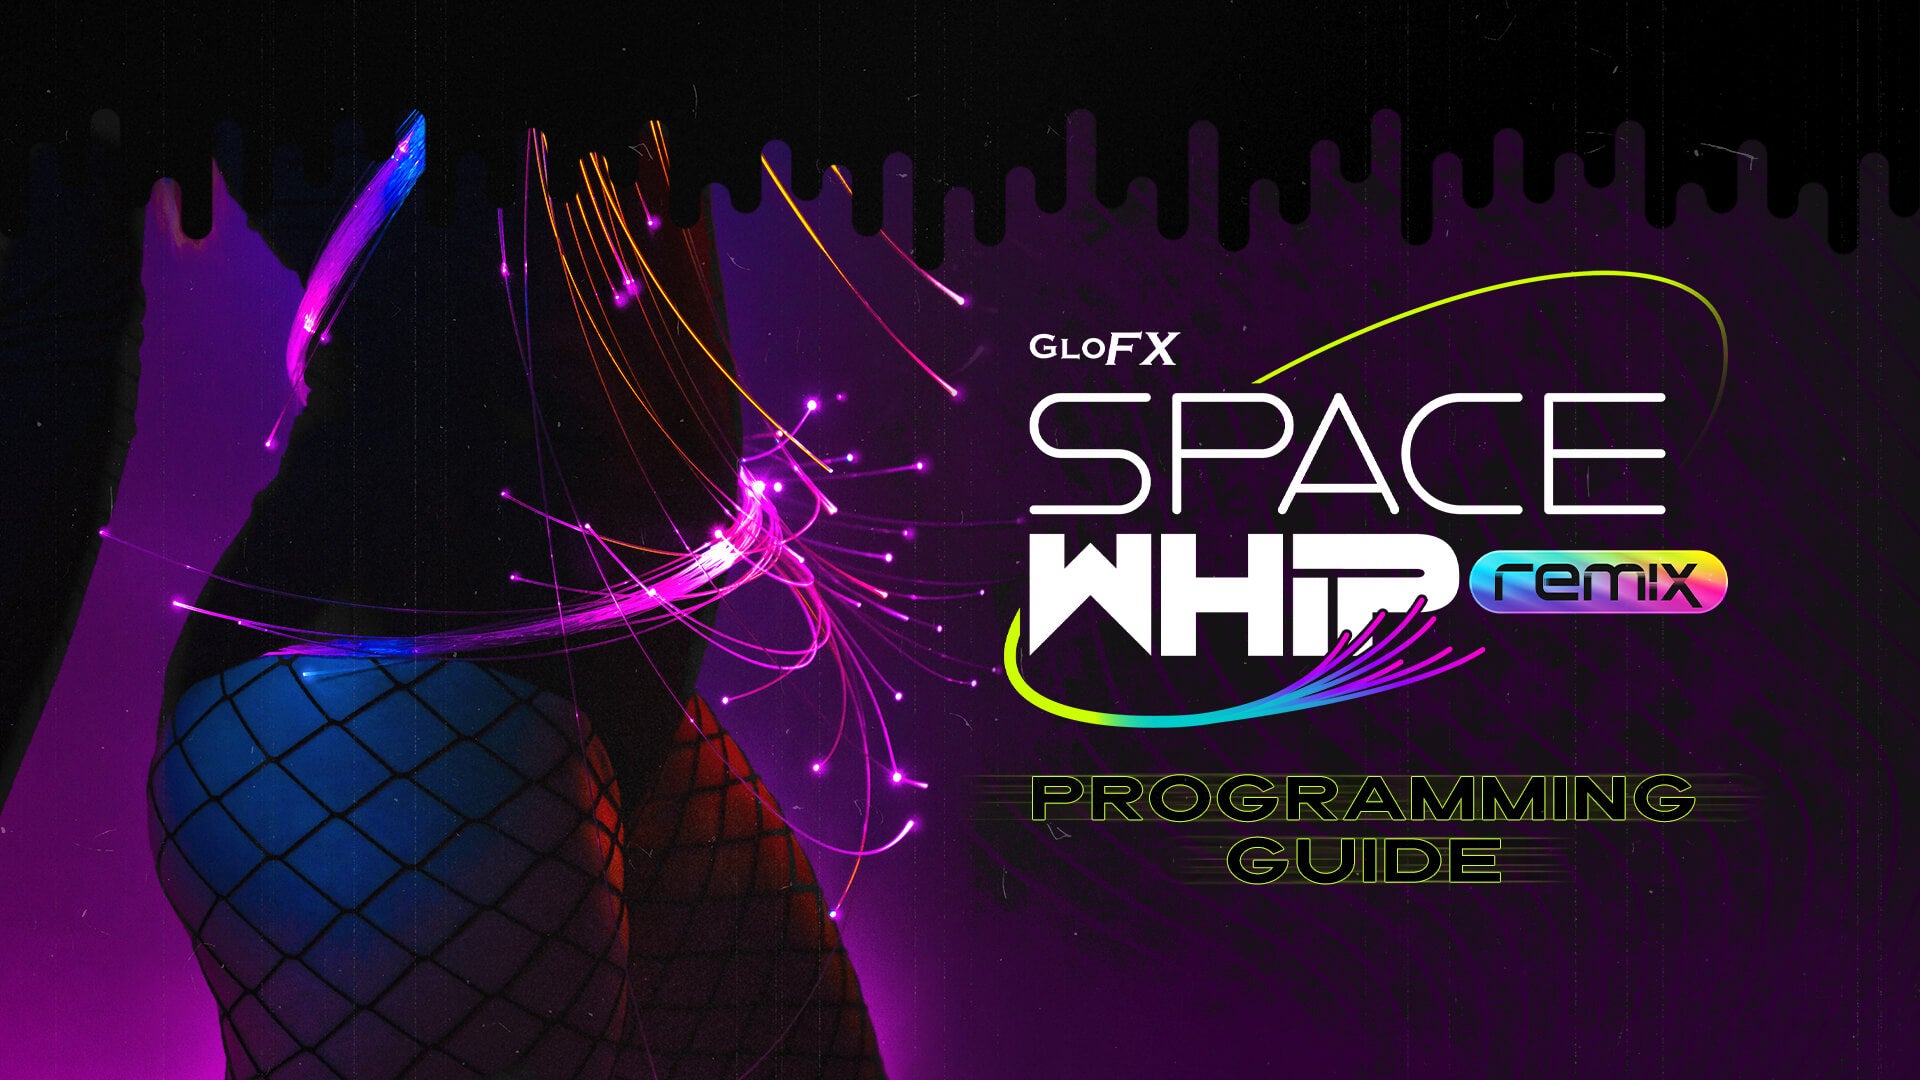 the spinsterz space whip remix programmable guide